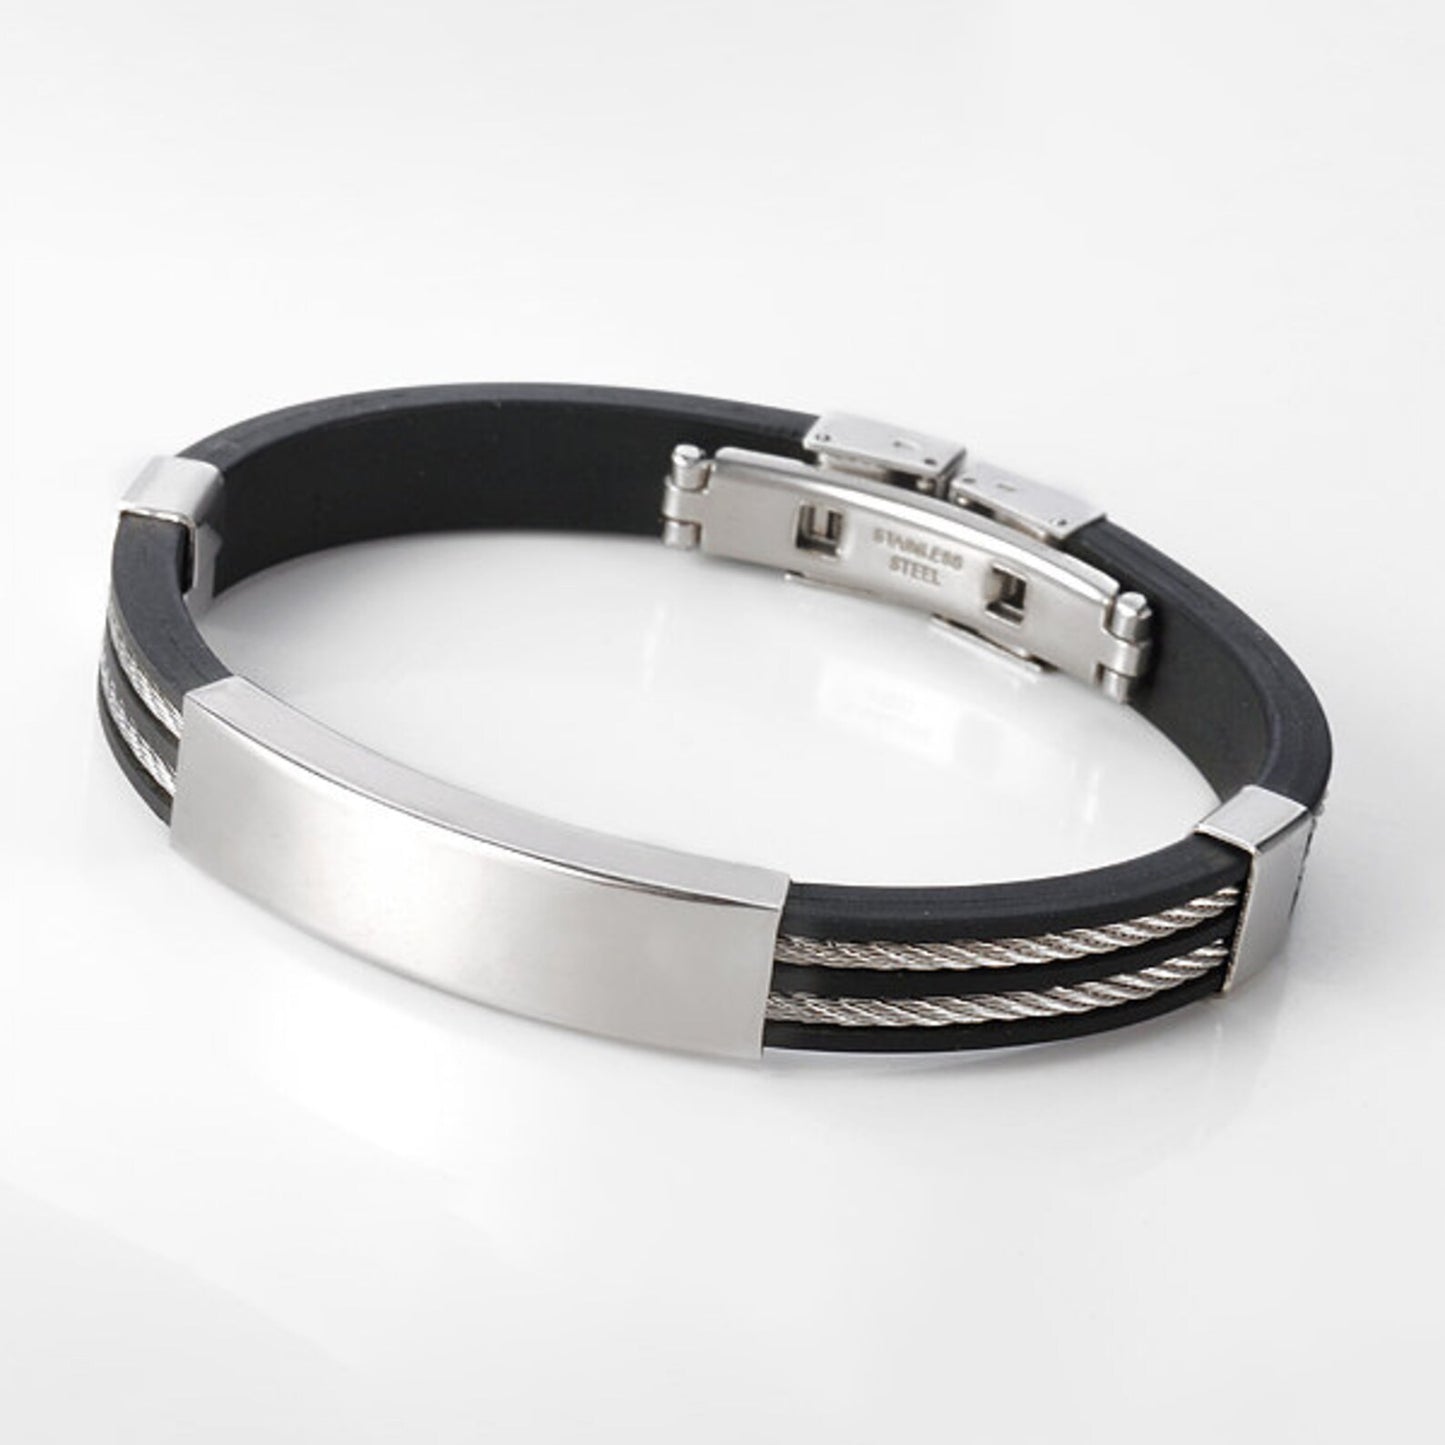 Stainless Steel Cable bracelet with black rubber